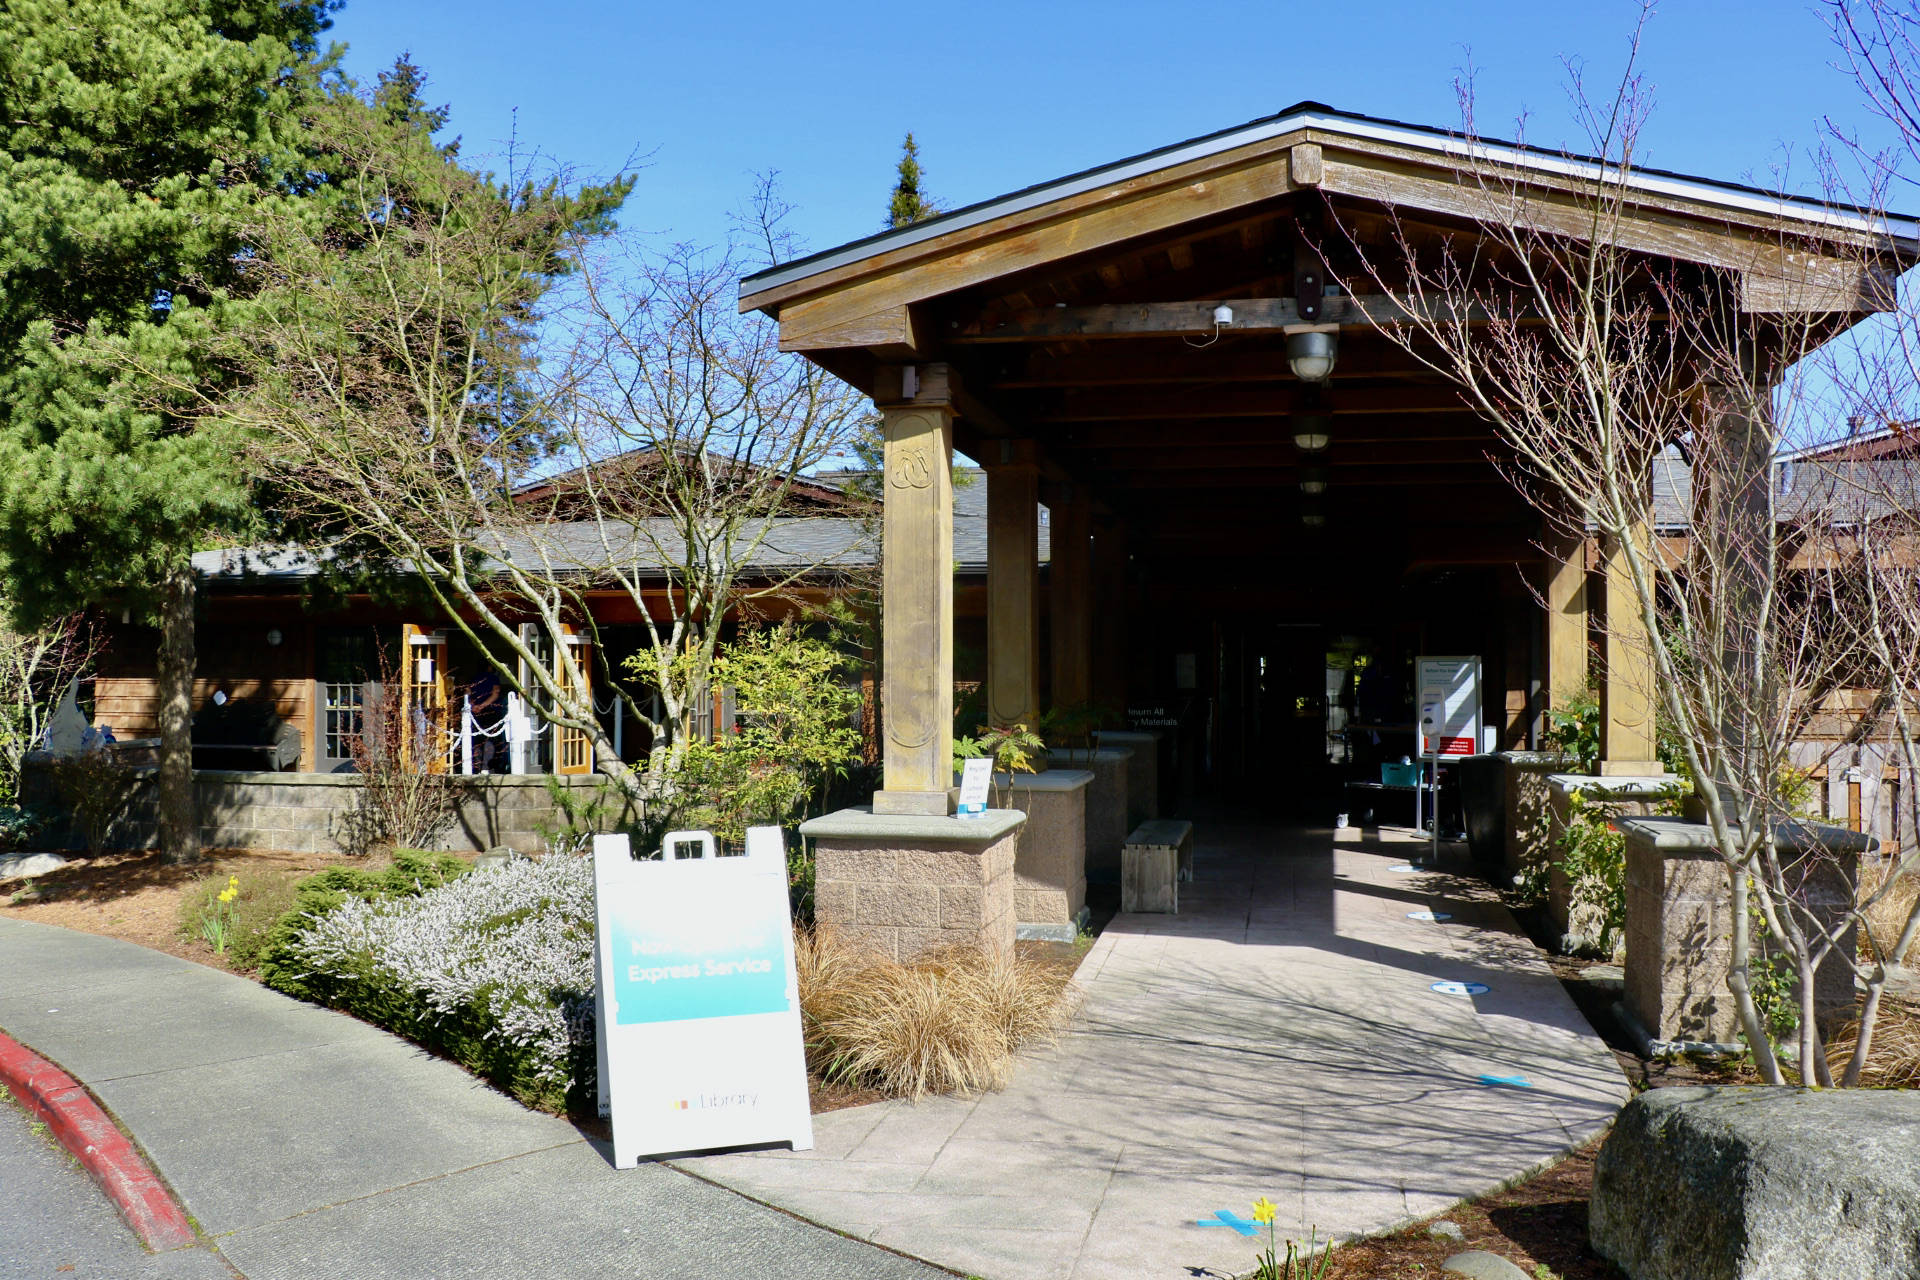 The Poulsbo Library is now open after being closed for over a year due to the COVID-19 pandemic and renovations at the library.